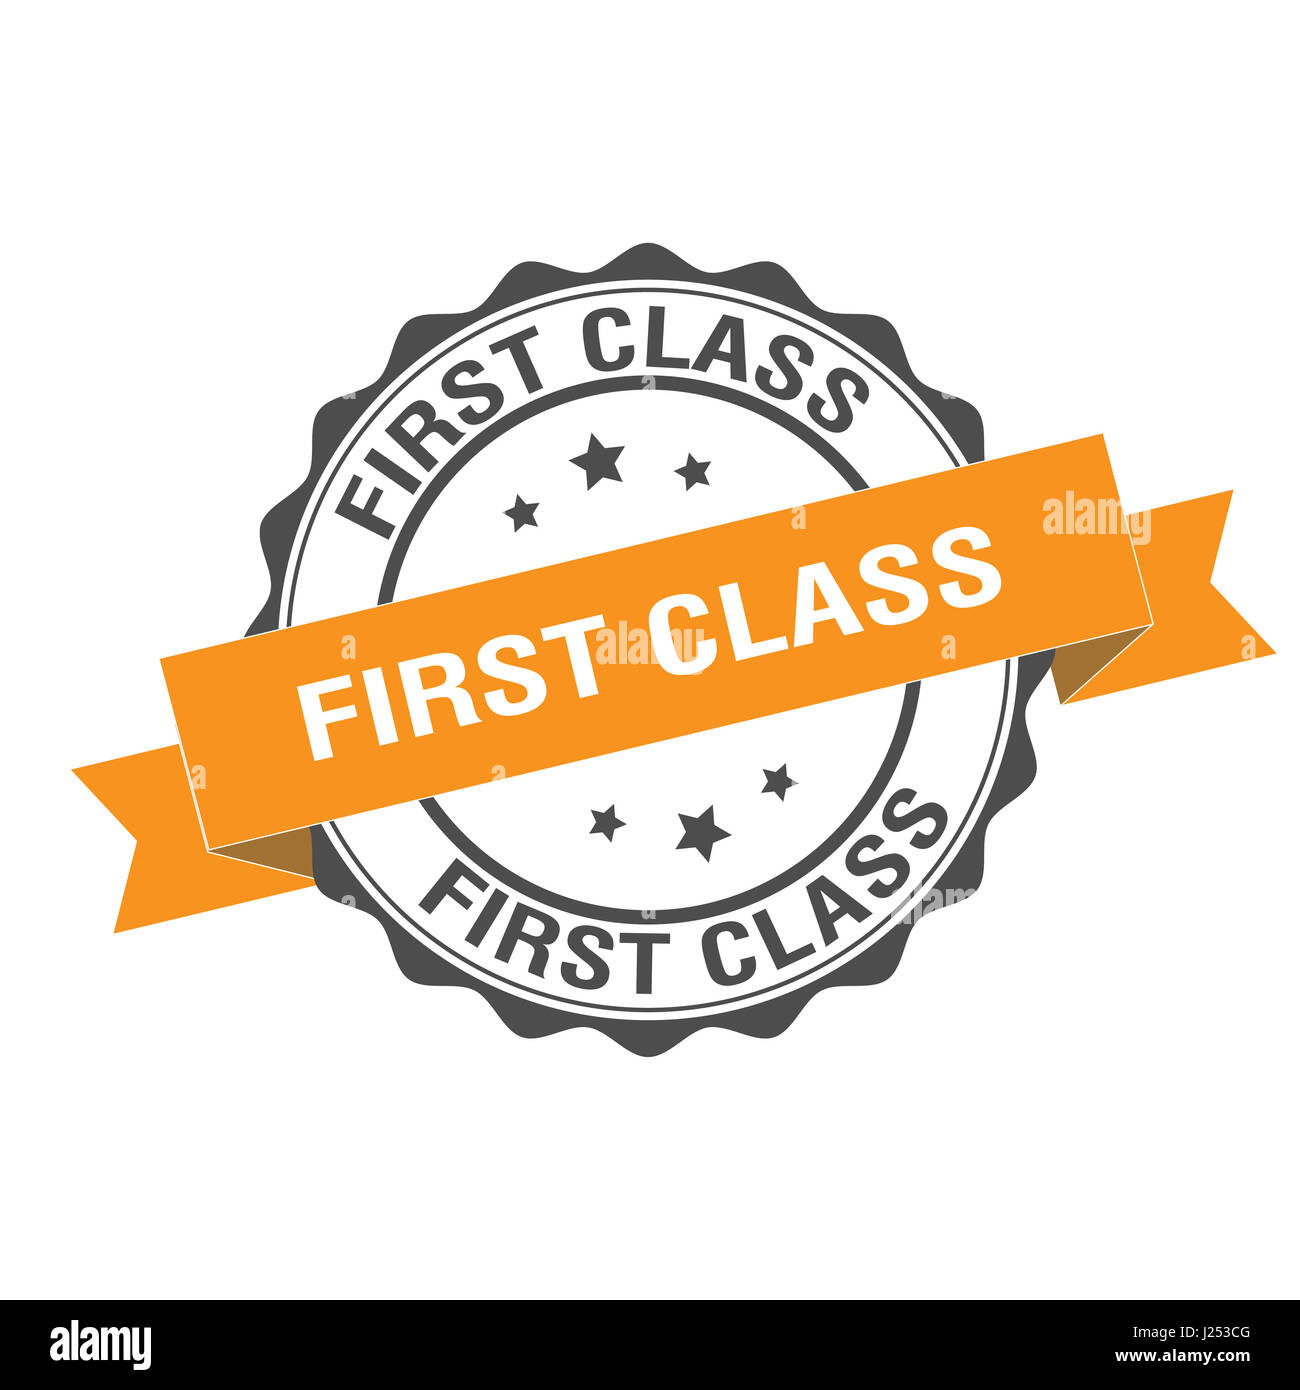 BEST IN CLASS Gold Stamp Award. Vector Gold Award With BEST IN CLASS Text.  Text Labels Are Placed Between Parallel Lines And On Circle. Golden Area  Has Metallic Texture. Royalty Free SVG